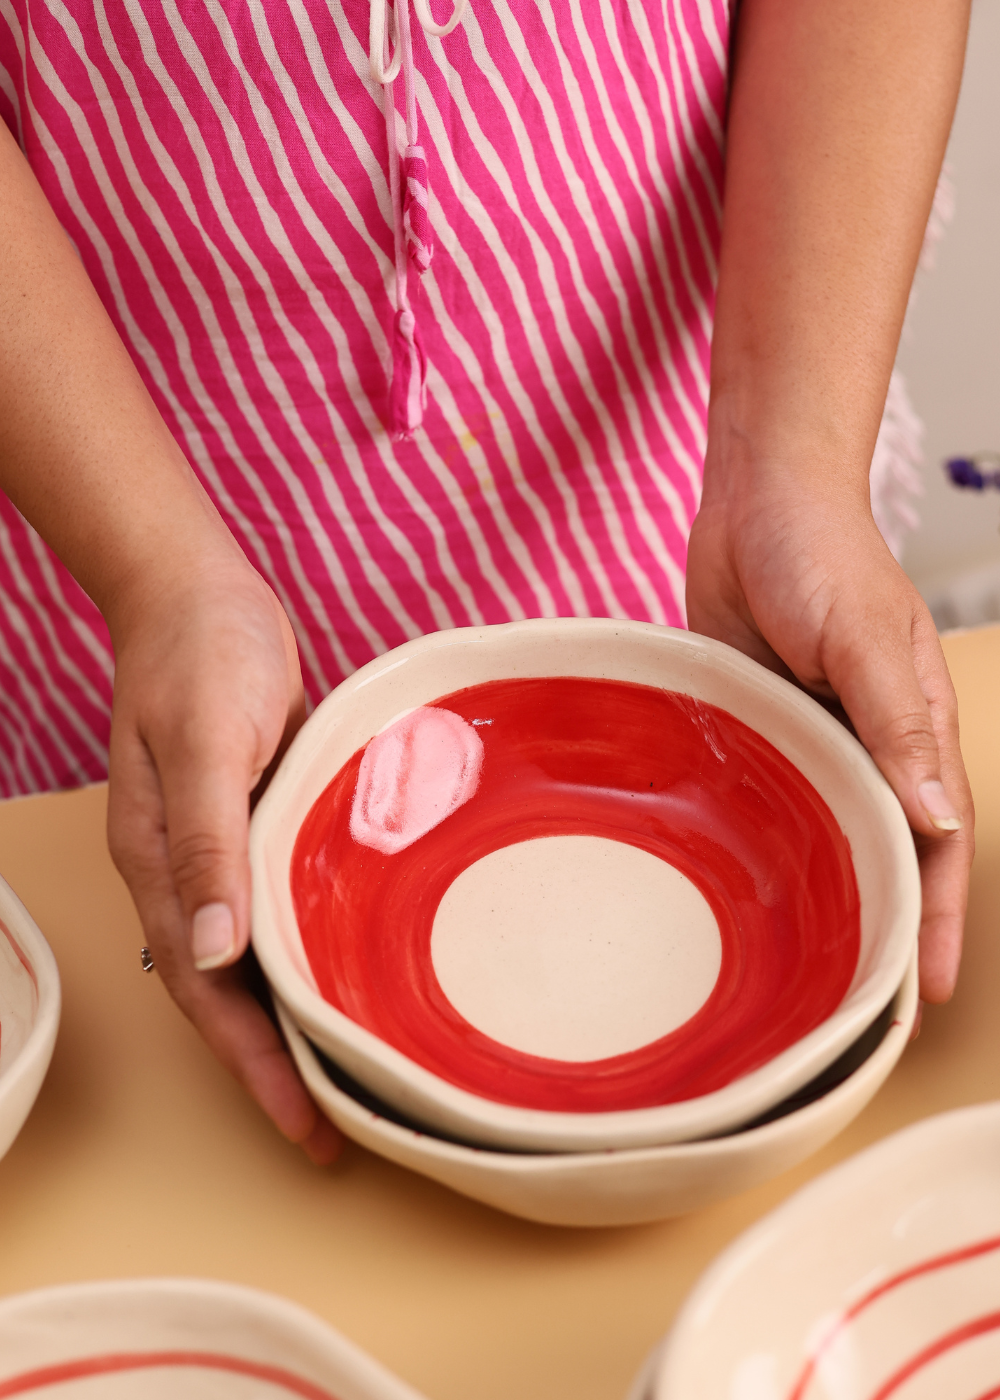 Red and white bowls in hand 